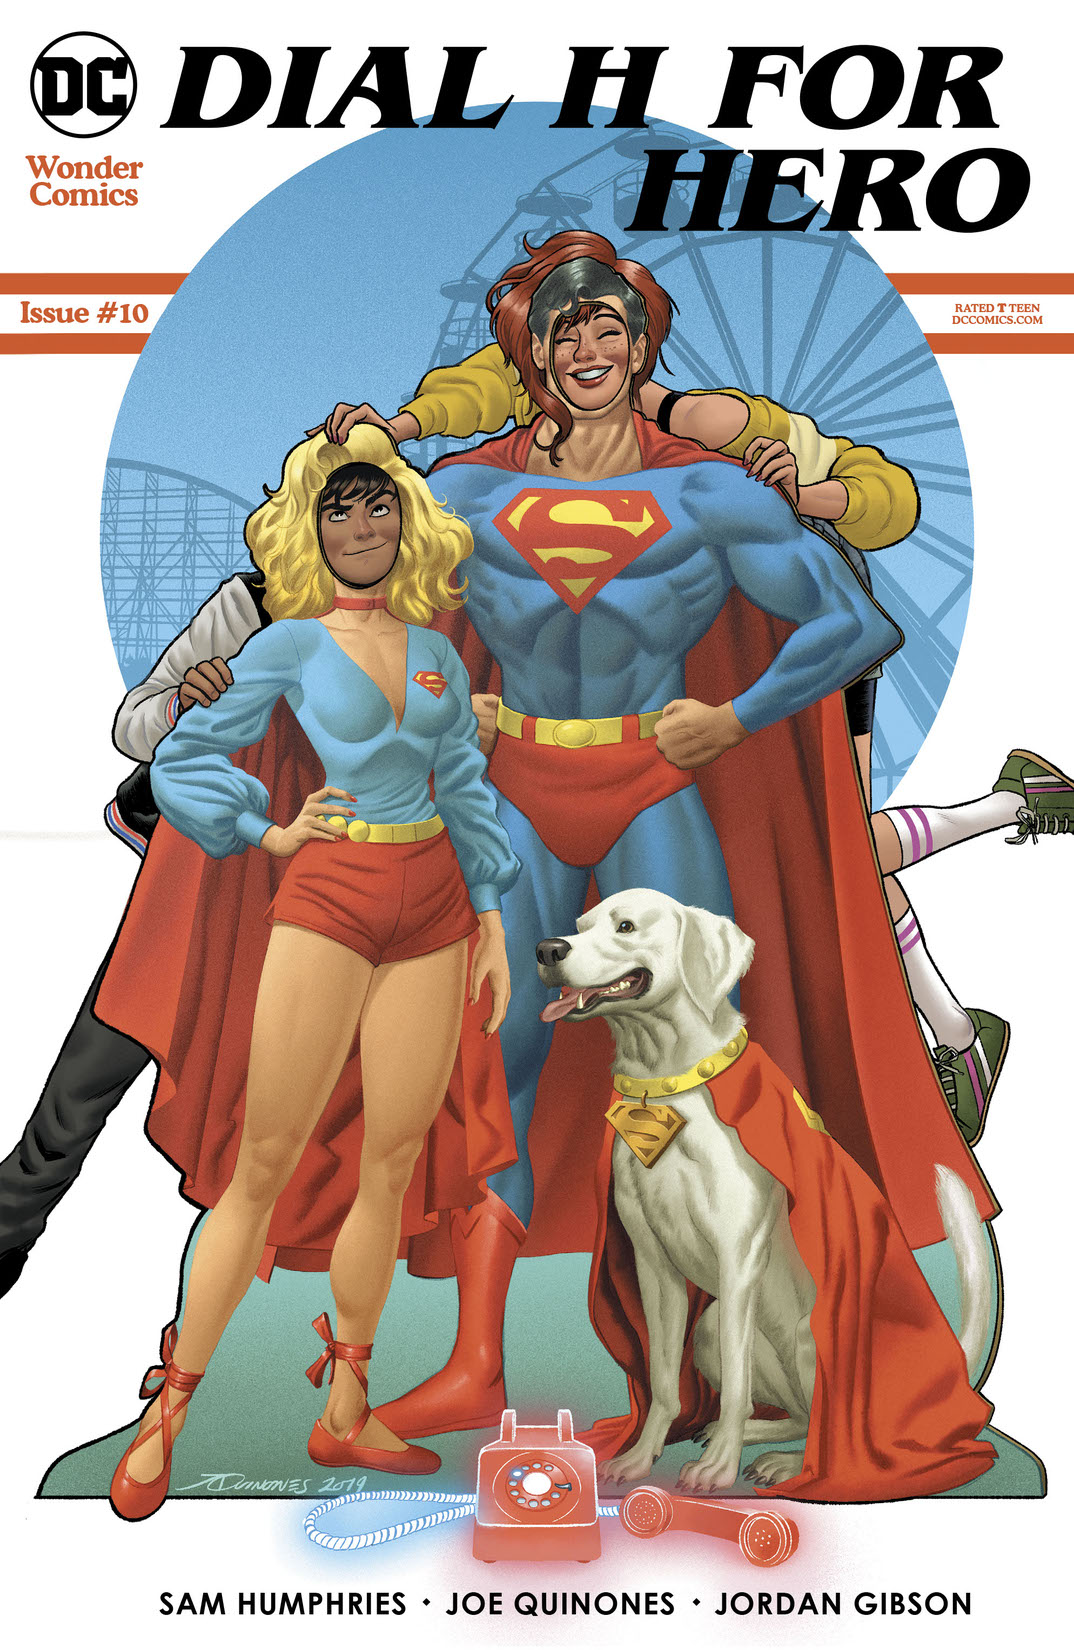 Dial H for Hero (2019-) #10 preview images